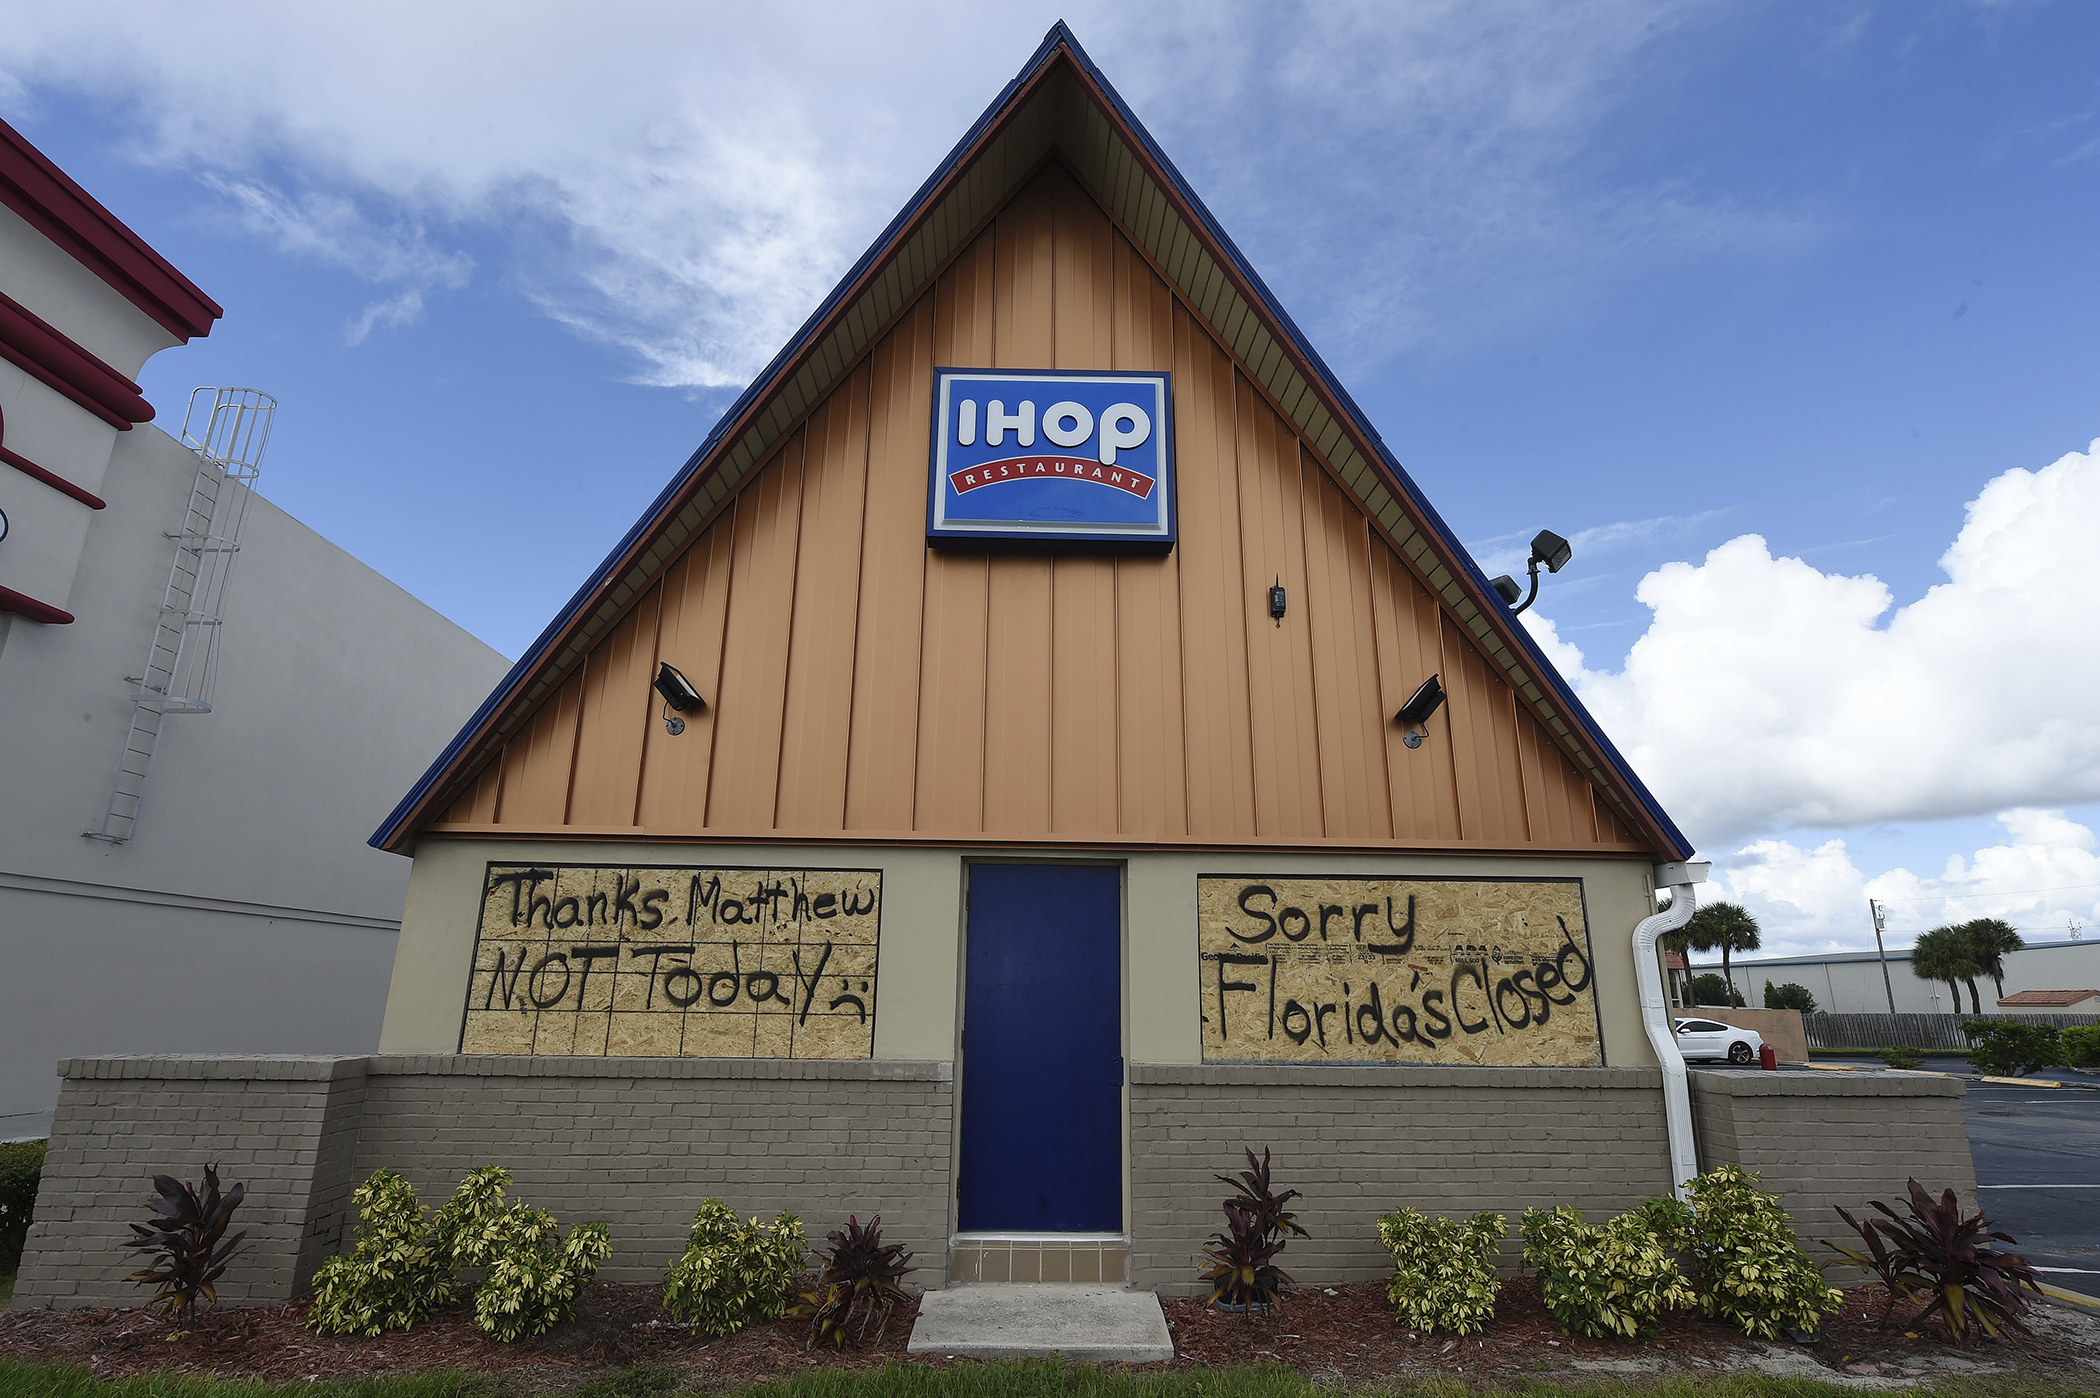 A boarded up IHOP restaurant has messages to Hurricane Matthew written on the plywood as it sits closed ahead of Hurricane Matthew on Cocoa Beach, Florida on October 5, 2016.